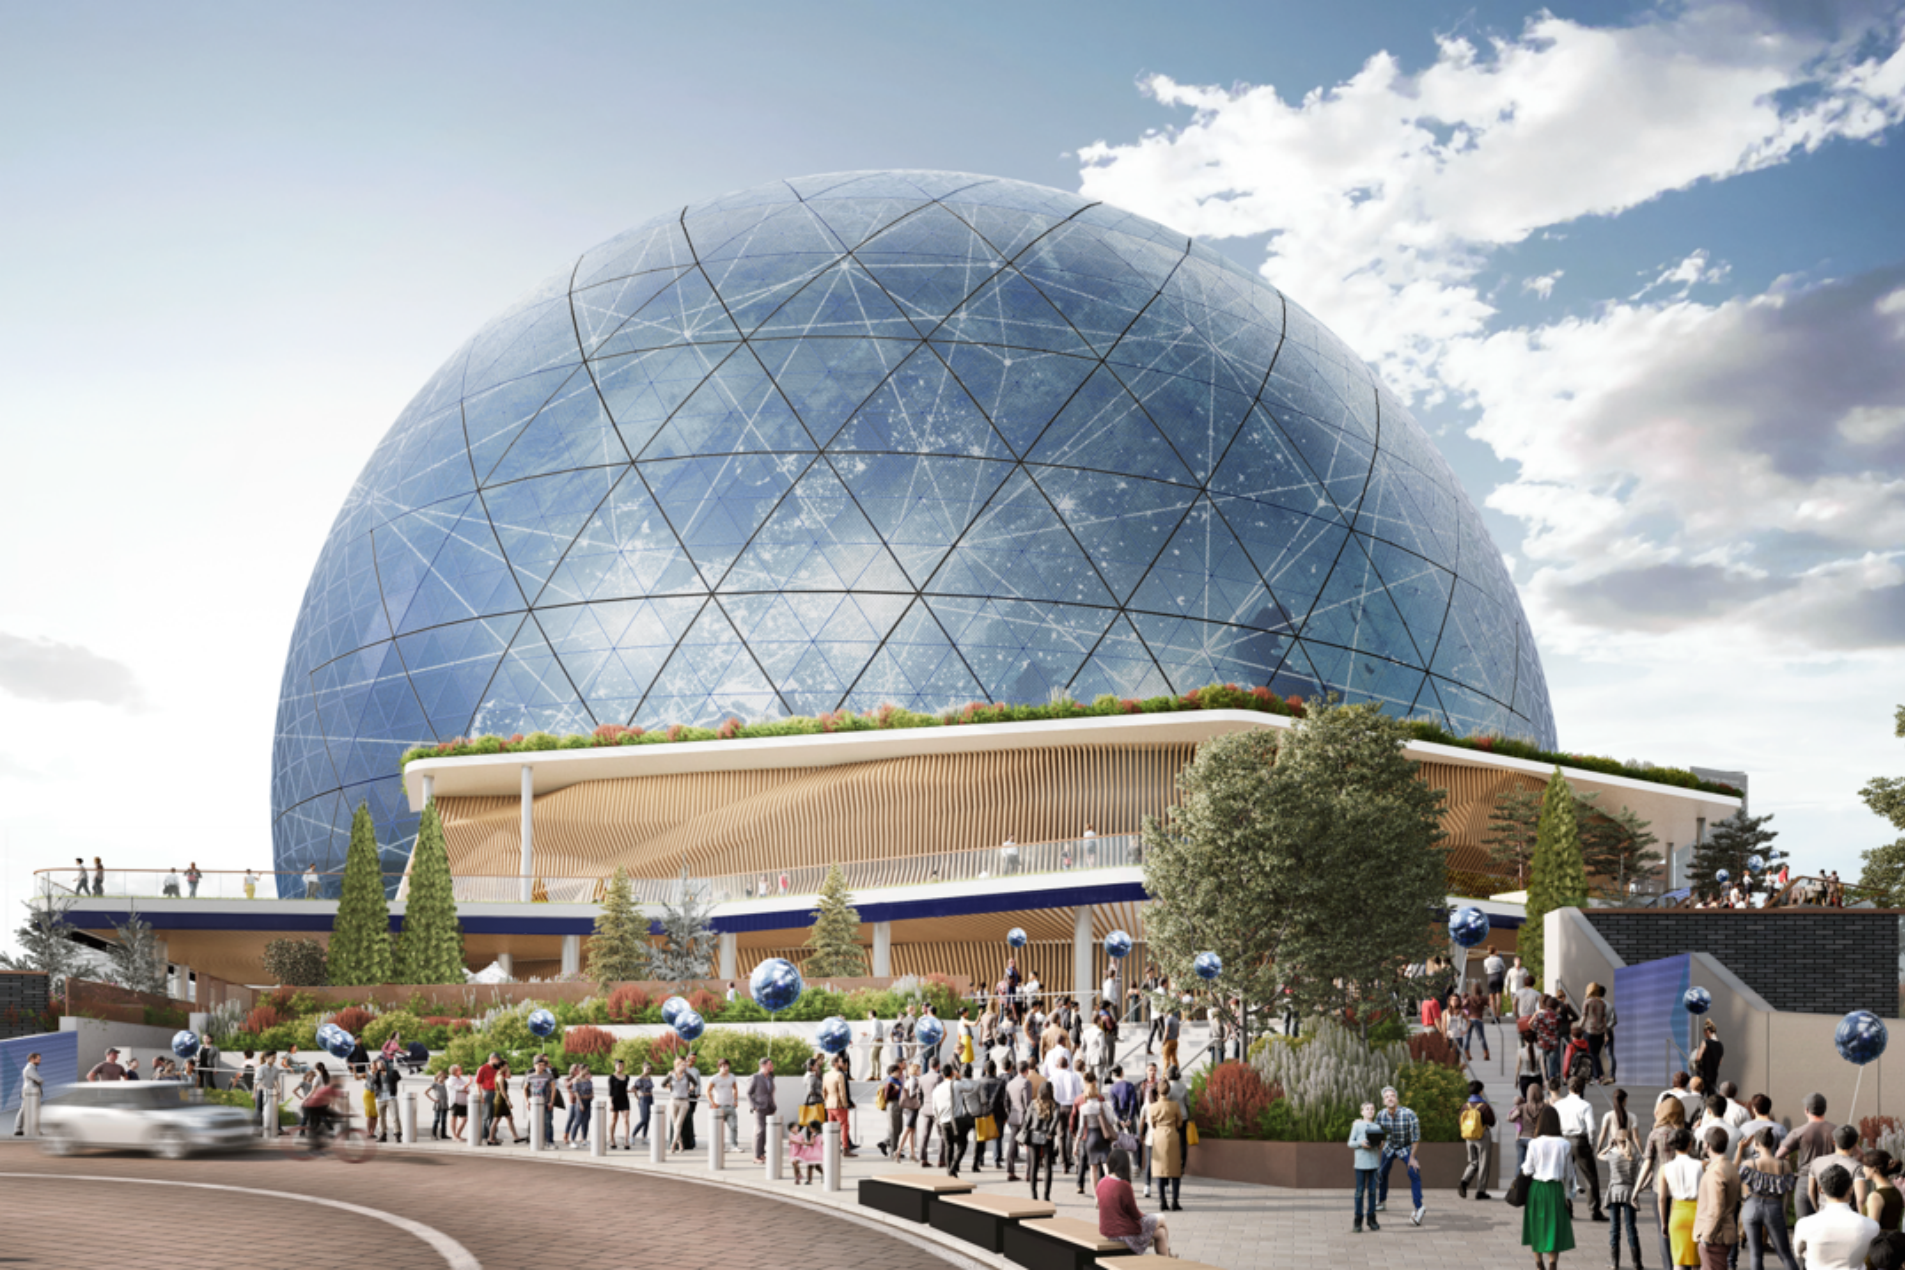 The MSG sphere was planned for Stratford